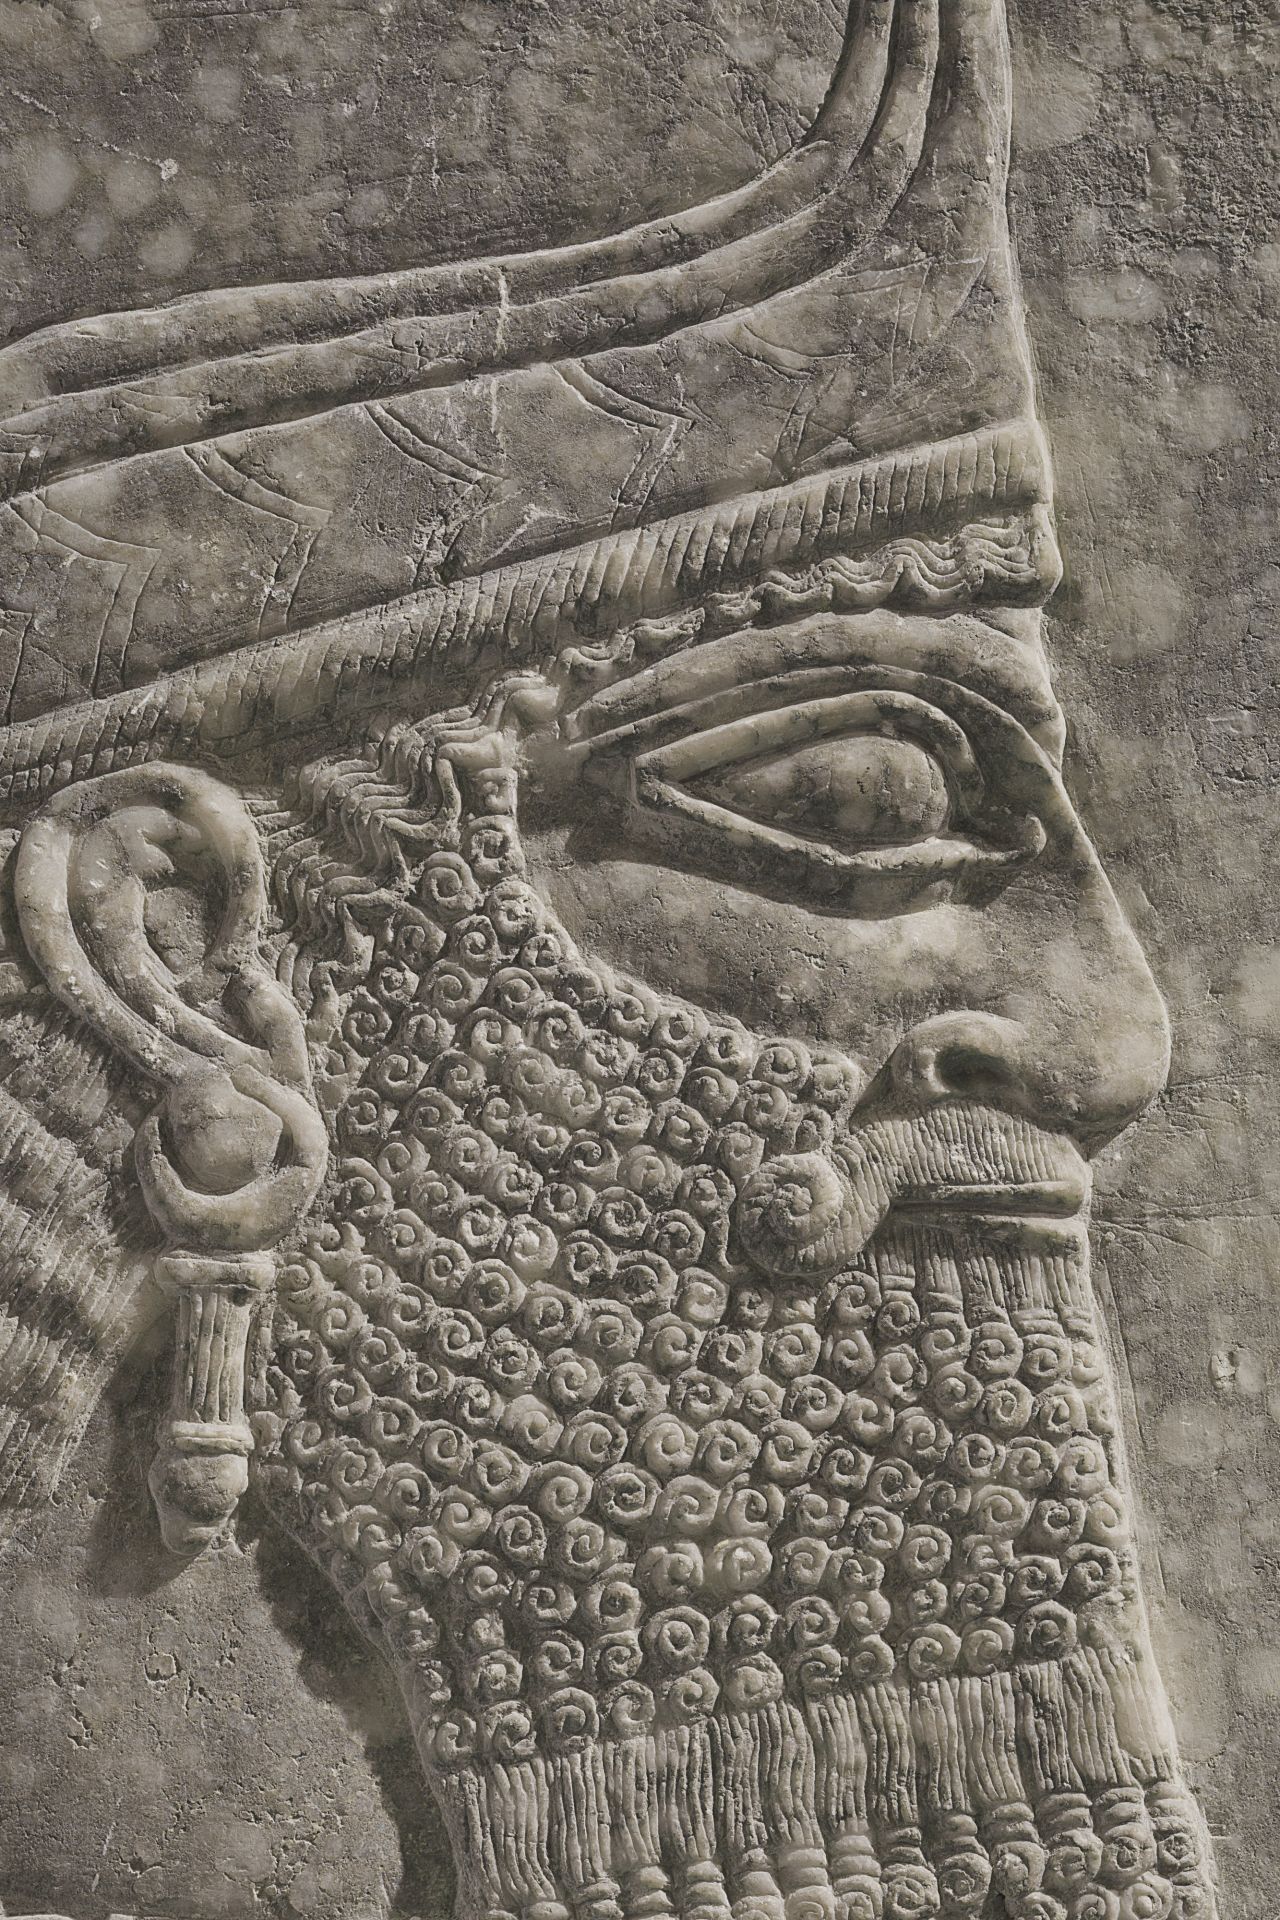 The face of the winged genius, with its almond-shaped eye, broad nose and tightly-curled beard, bears a close resemblance to King Ashurnasirpal II.  